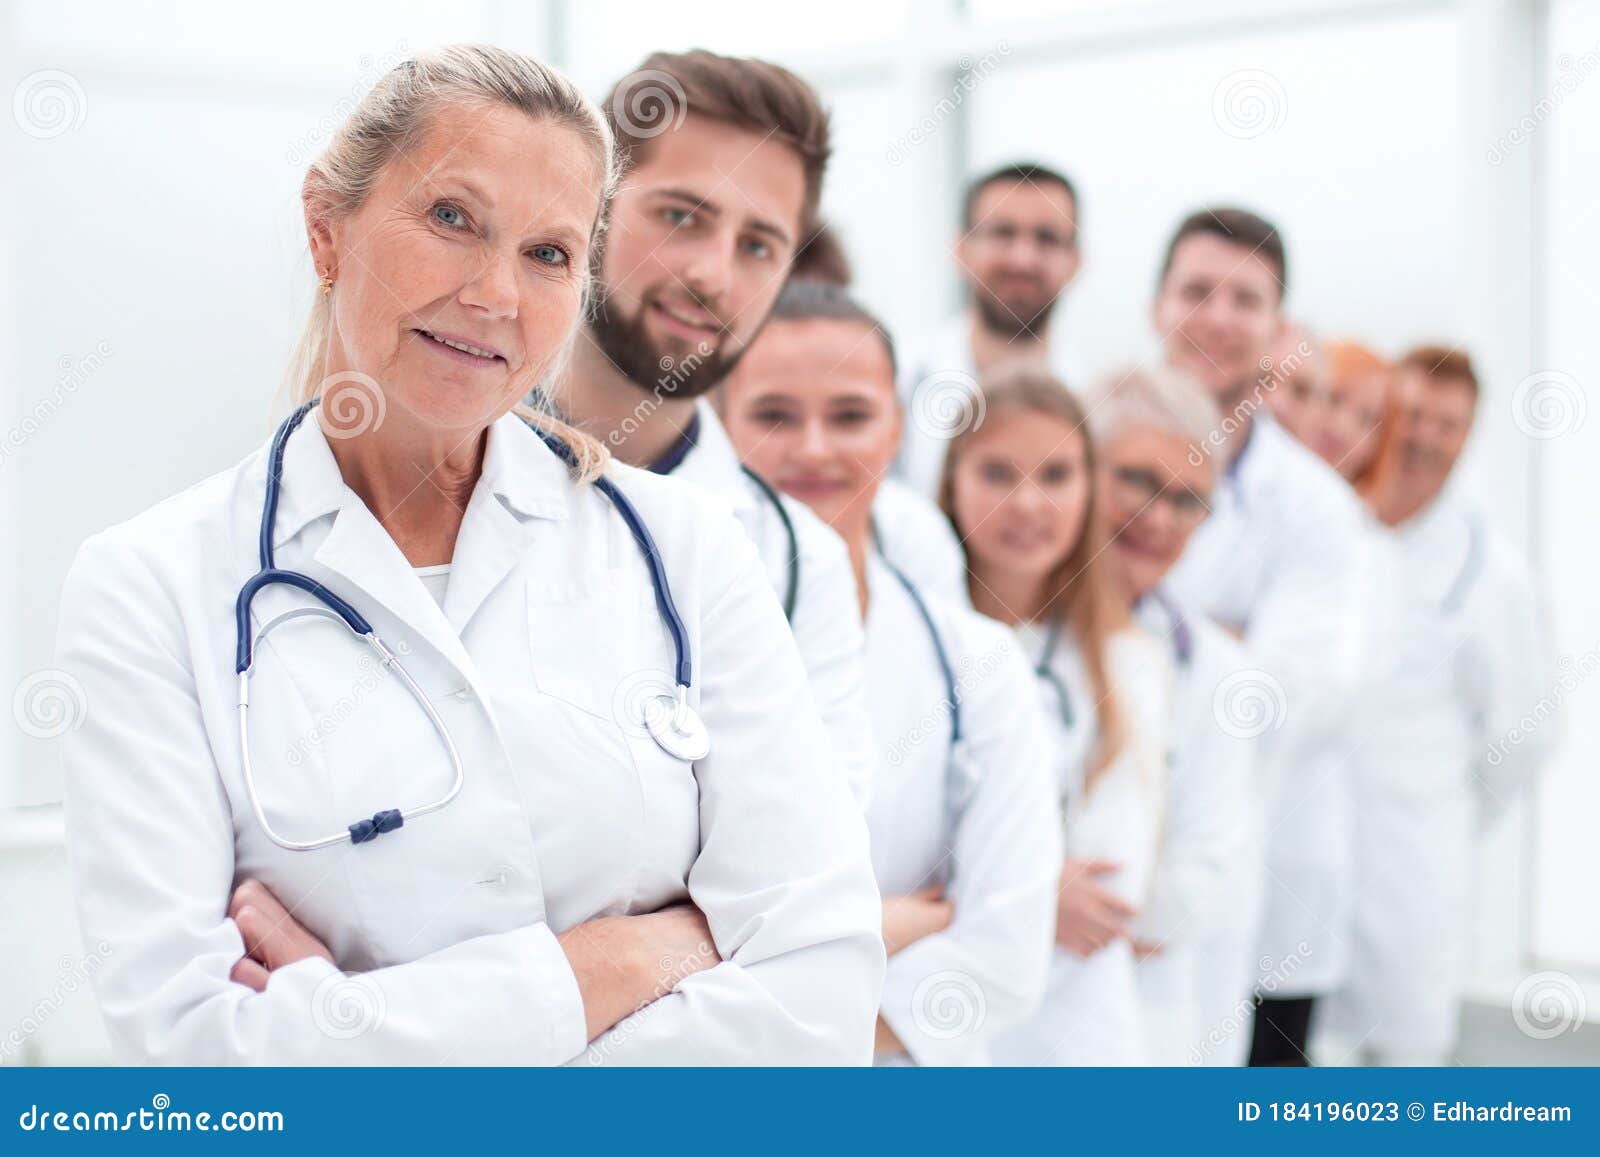 Close Up Team Of Medical Professionals Standing Together Stock Image